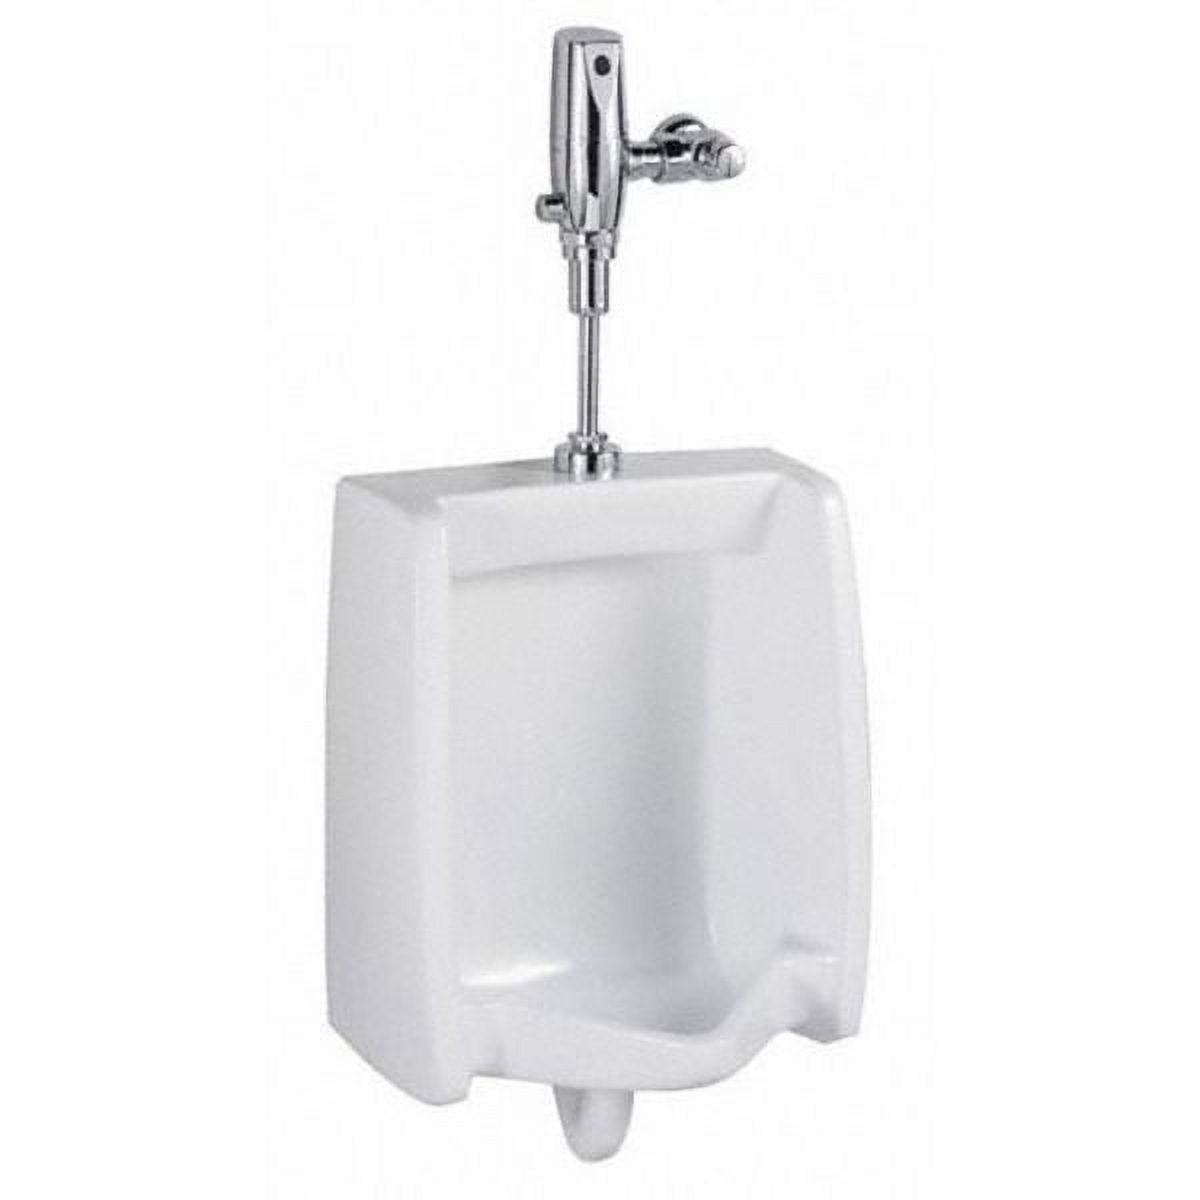 American Standard Selectronic Exposed Urinal Flush Valve, 3/4 In. Top Spud, Dc Powered, 0.125 Gpf, Polished Chrome - image 2 of 2